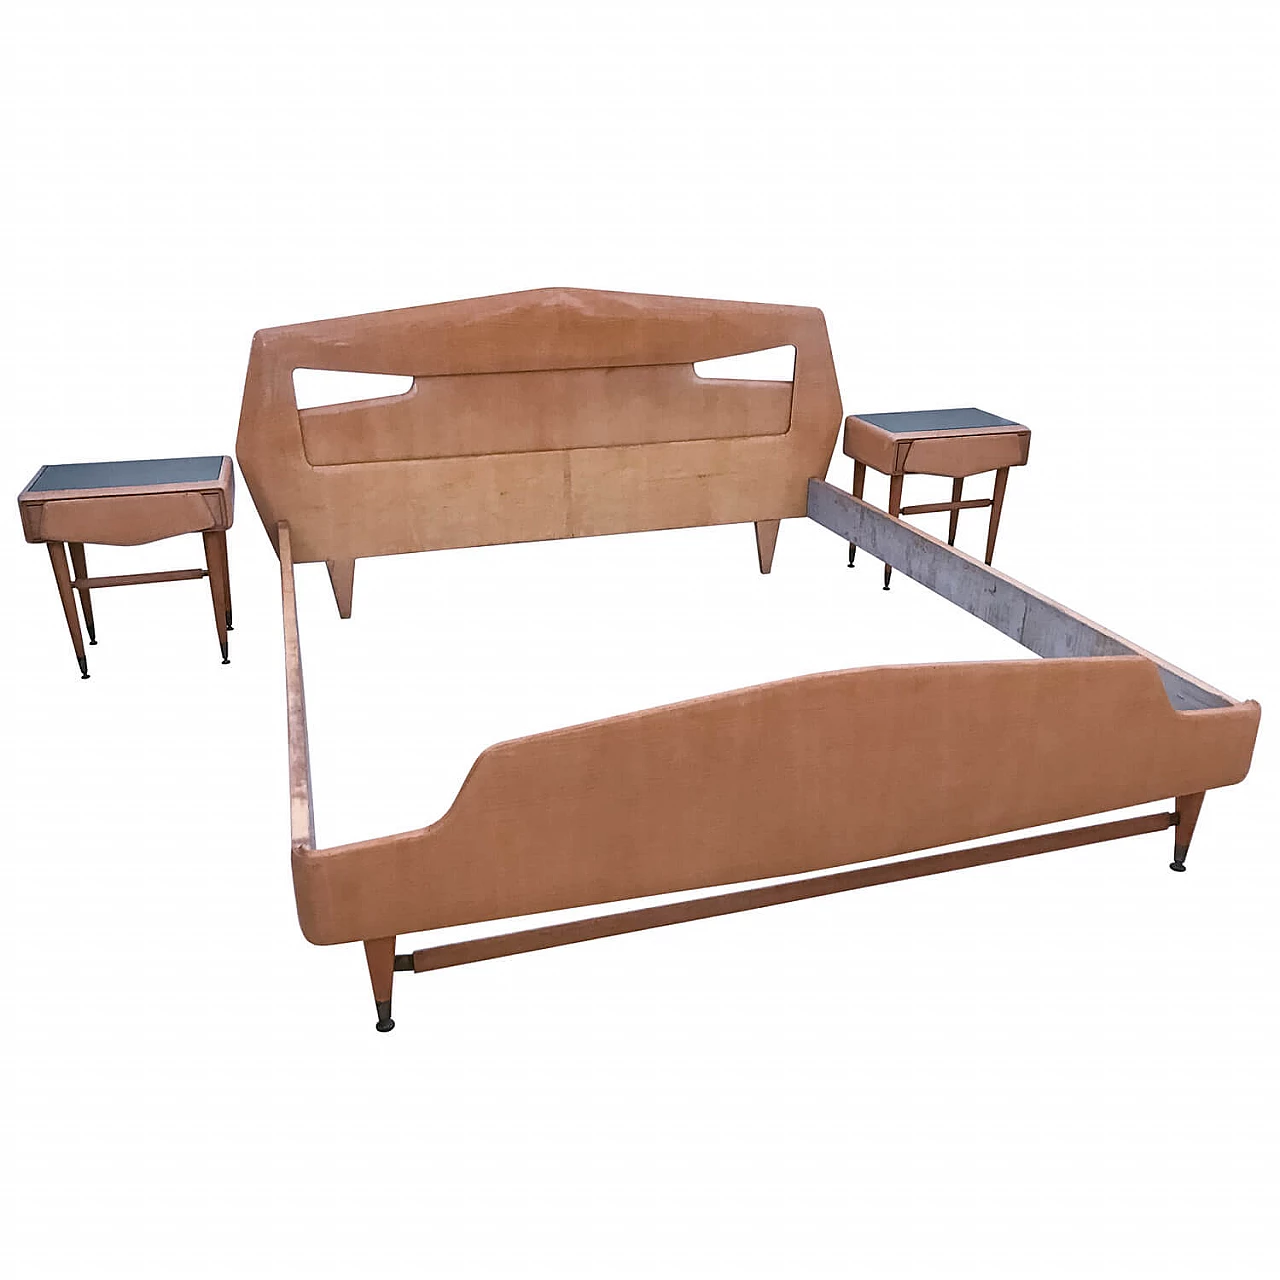 Italian maple bedroom set, bed and bedside tables, by Silvio Cavatorta, 1950 1079148